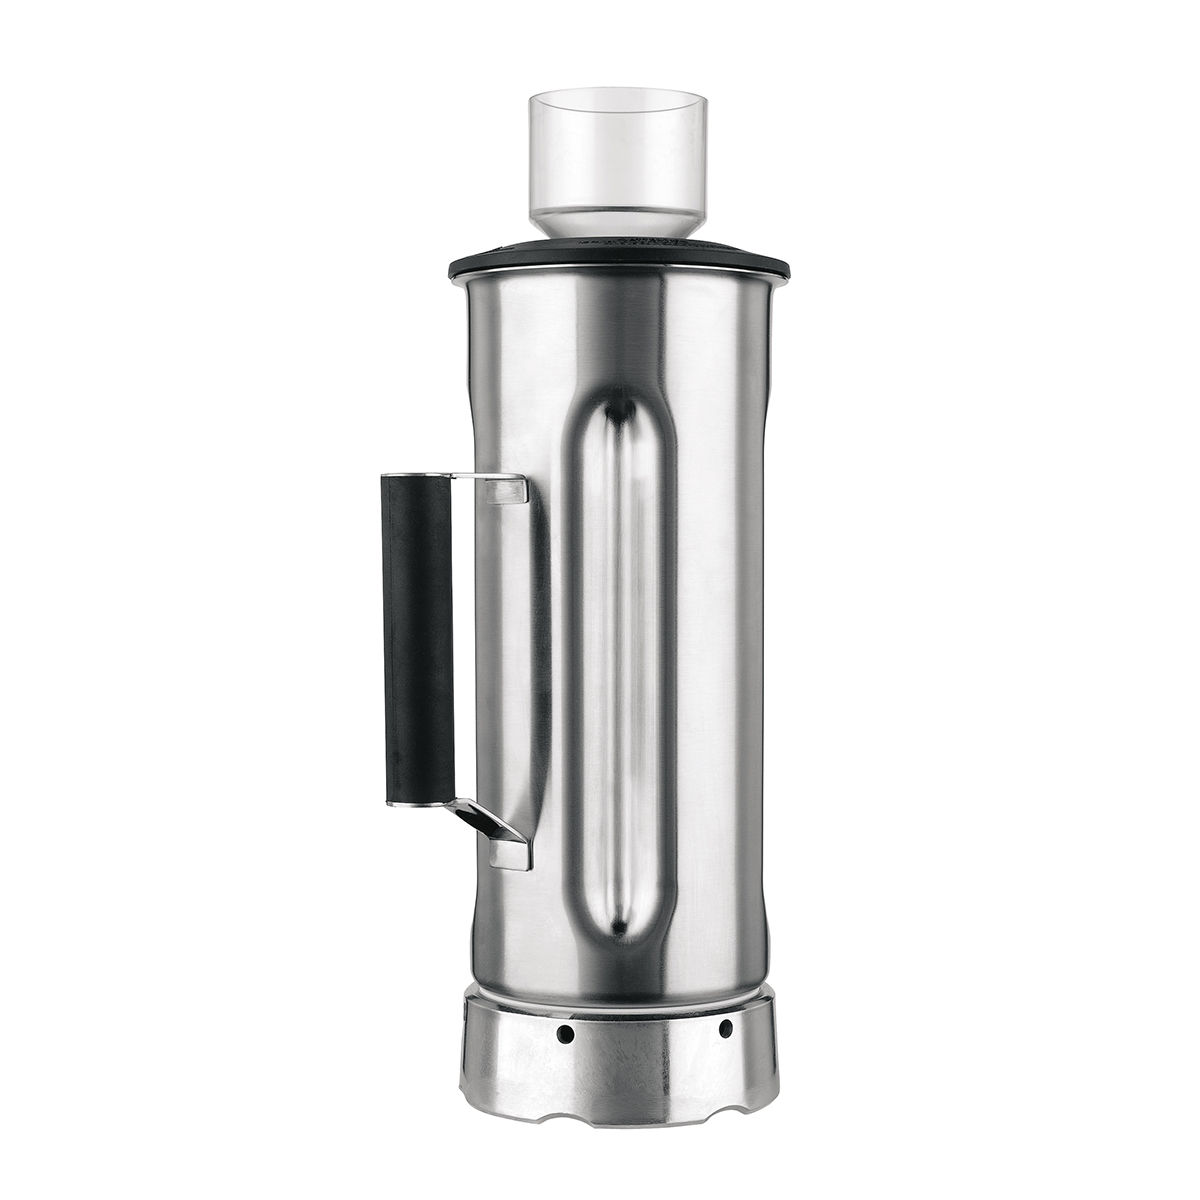 Hamilton Beach 6126-400 1.8L Stainless Steel Container